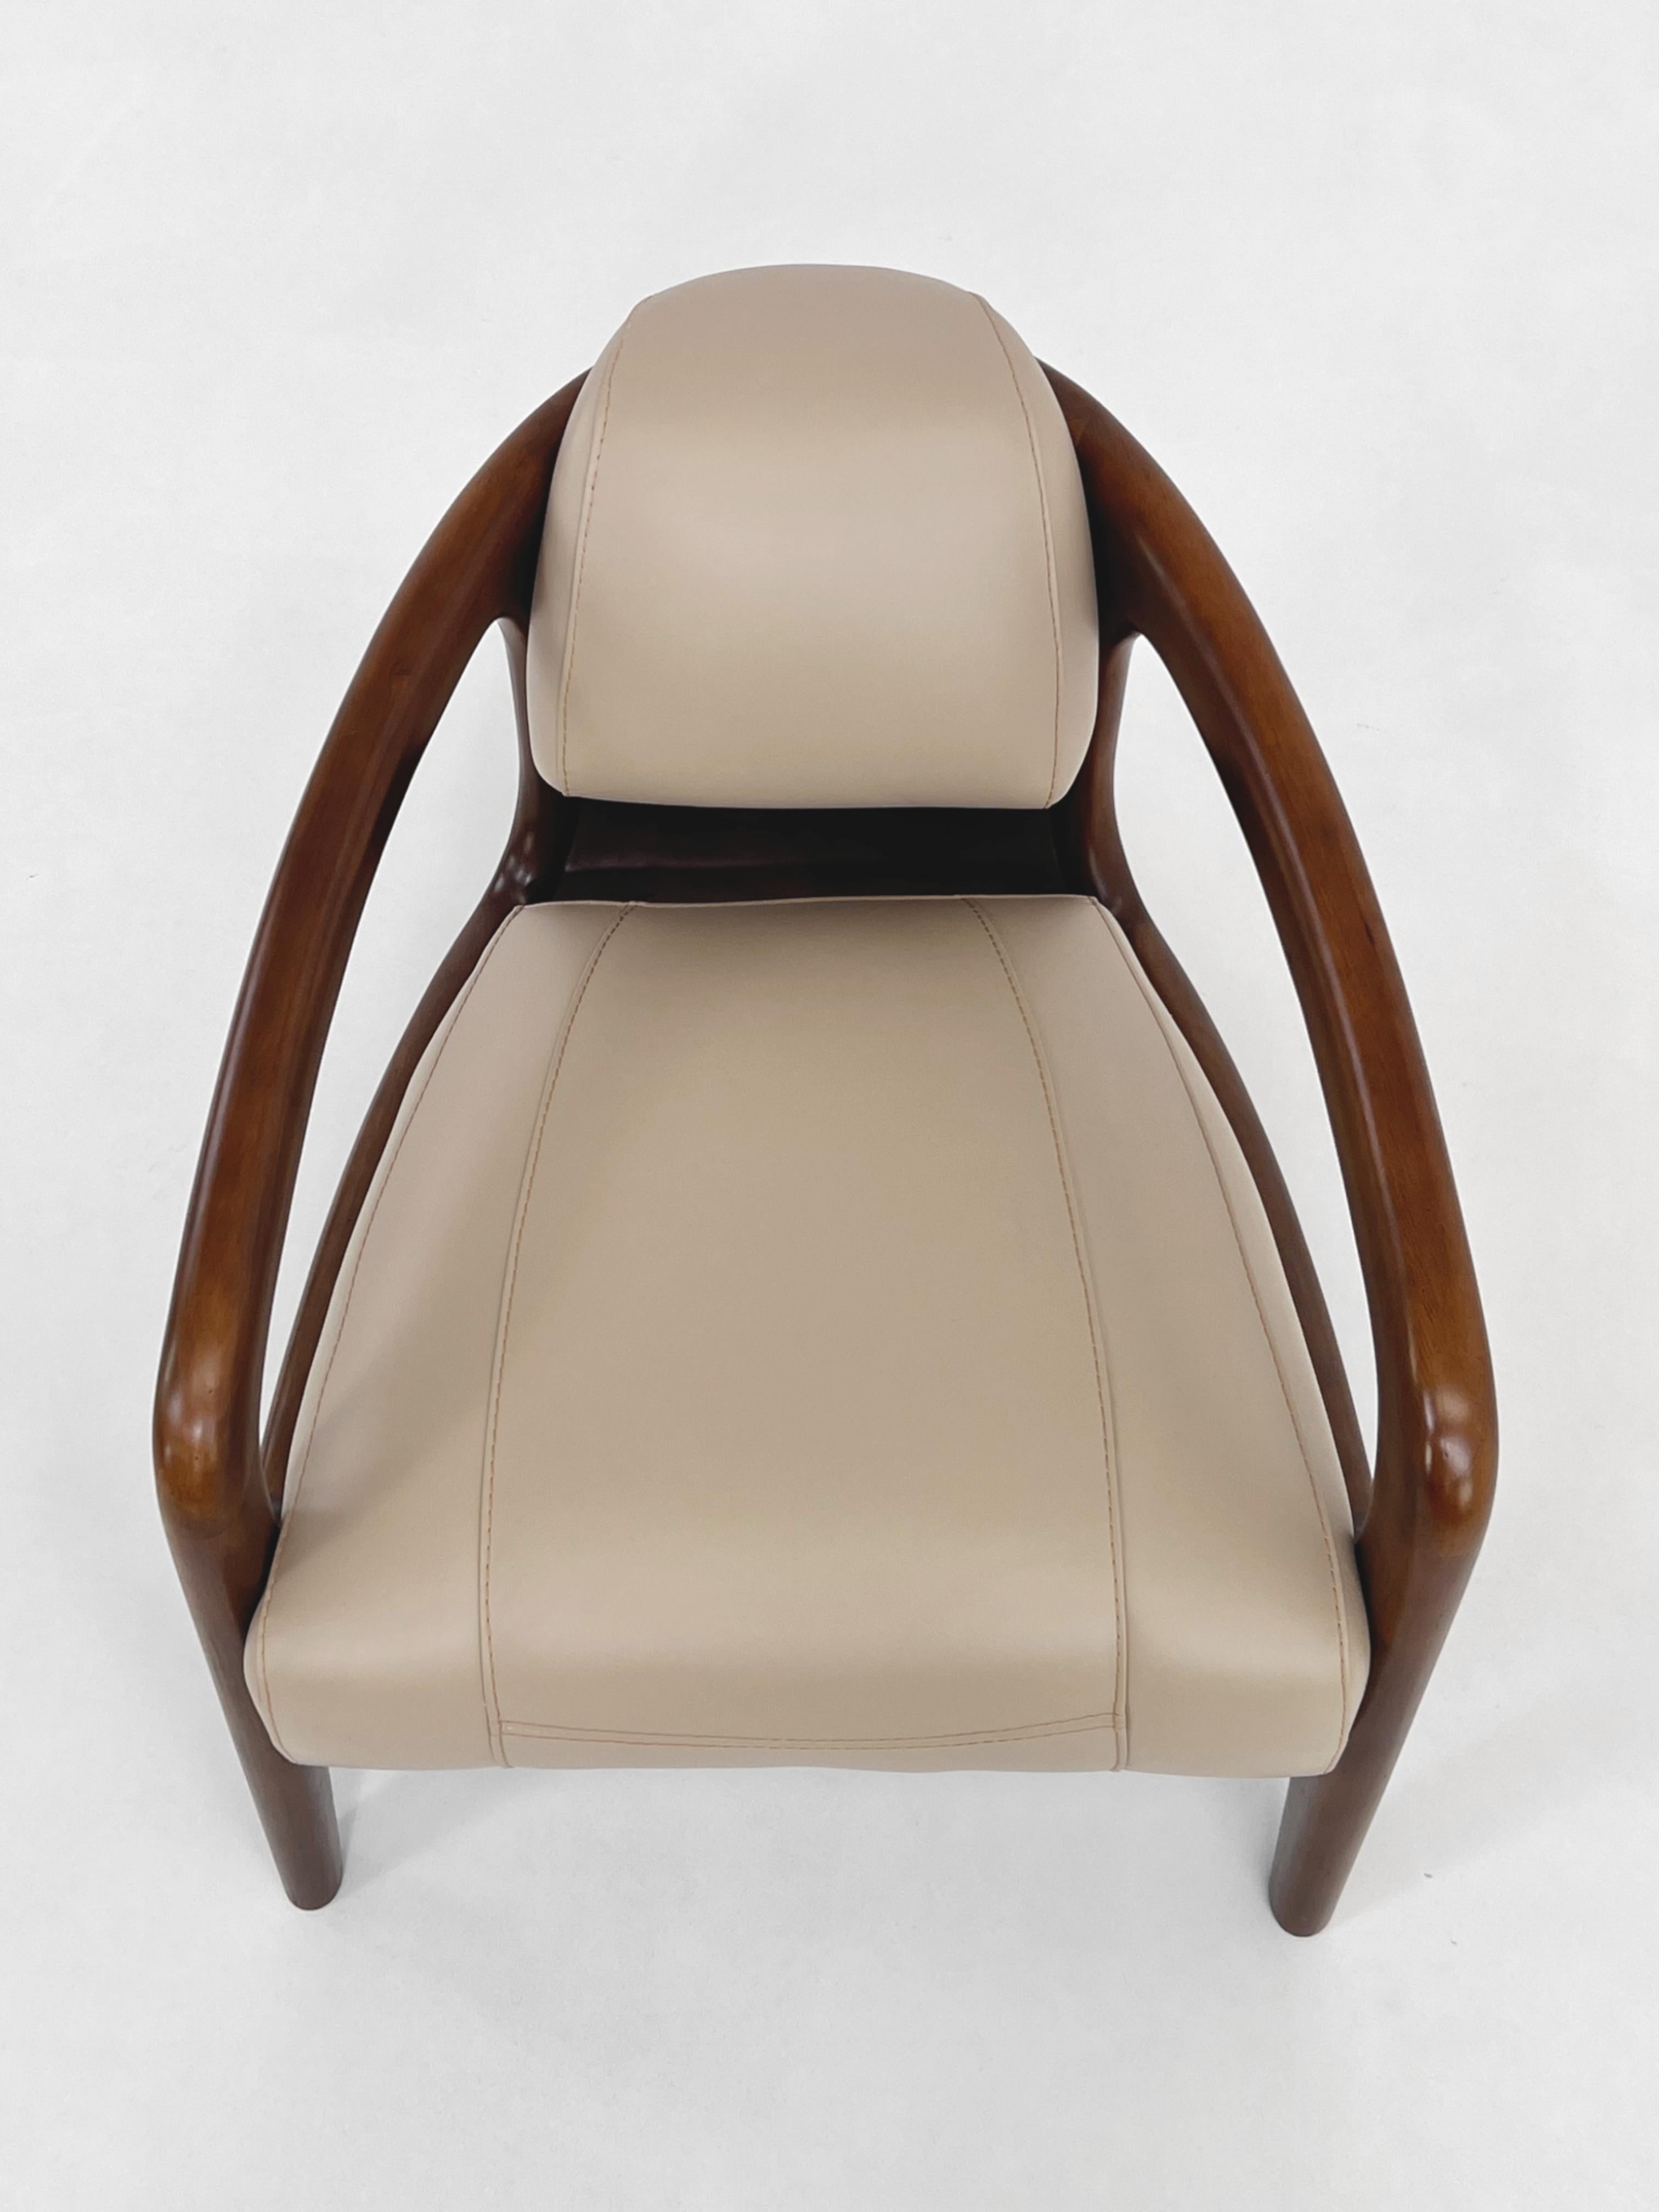 Art Deco Design Style Wooden And Leather Armchair composed of a wooden and curved structure with a comfy seat made in cream leather.